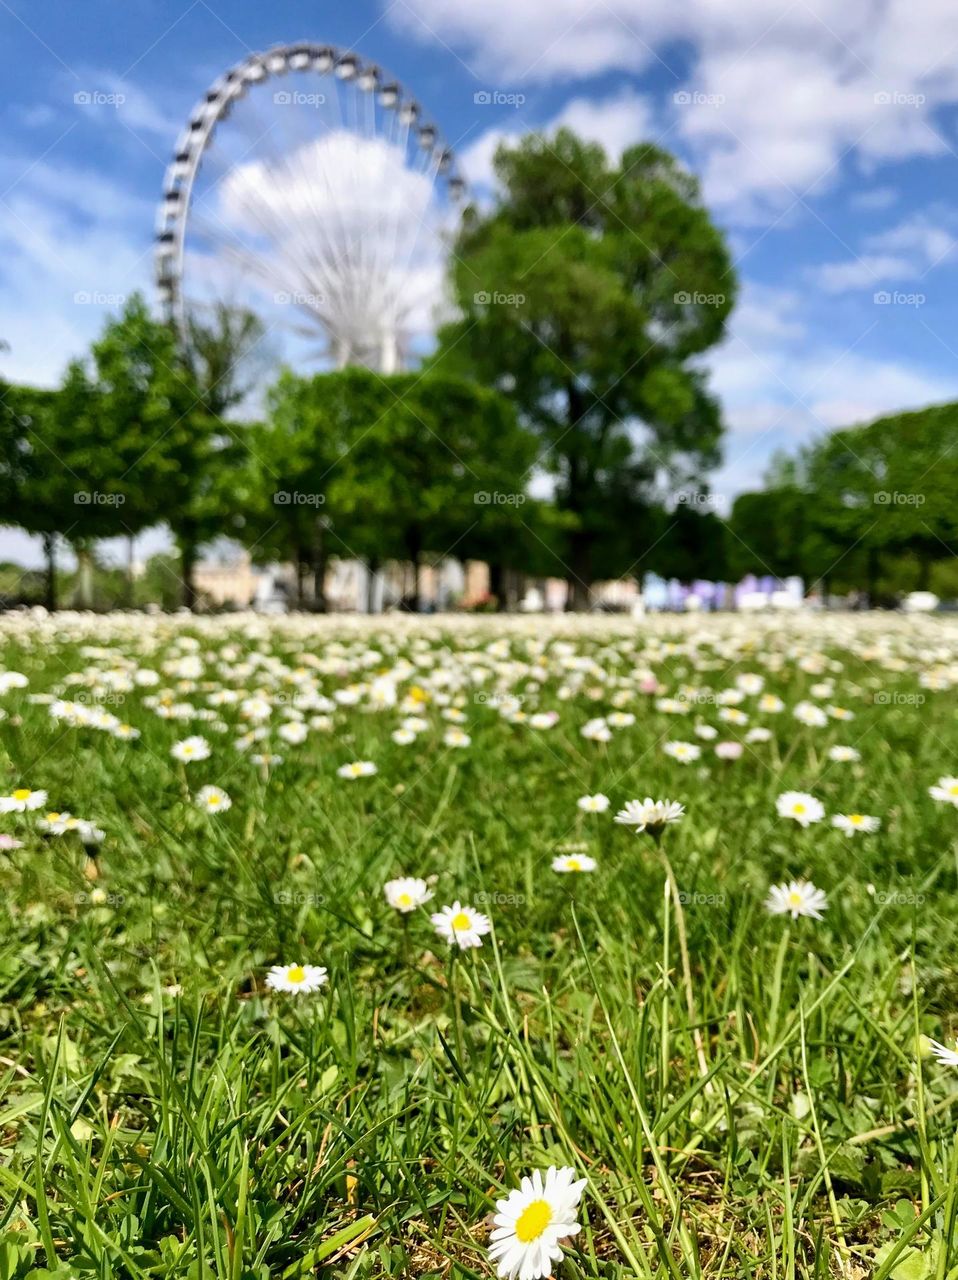 Paris in the spring: a view of the observation wheel from the lawn with blooming daisies